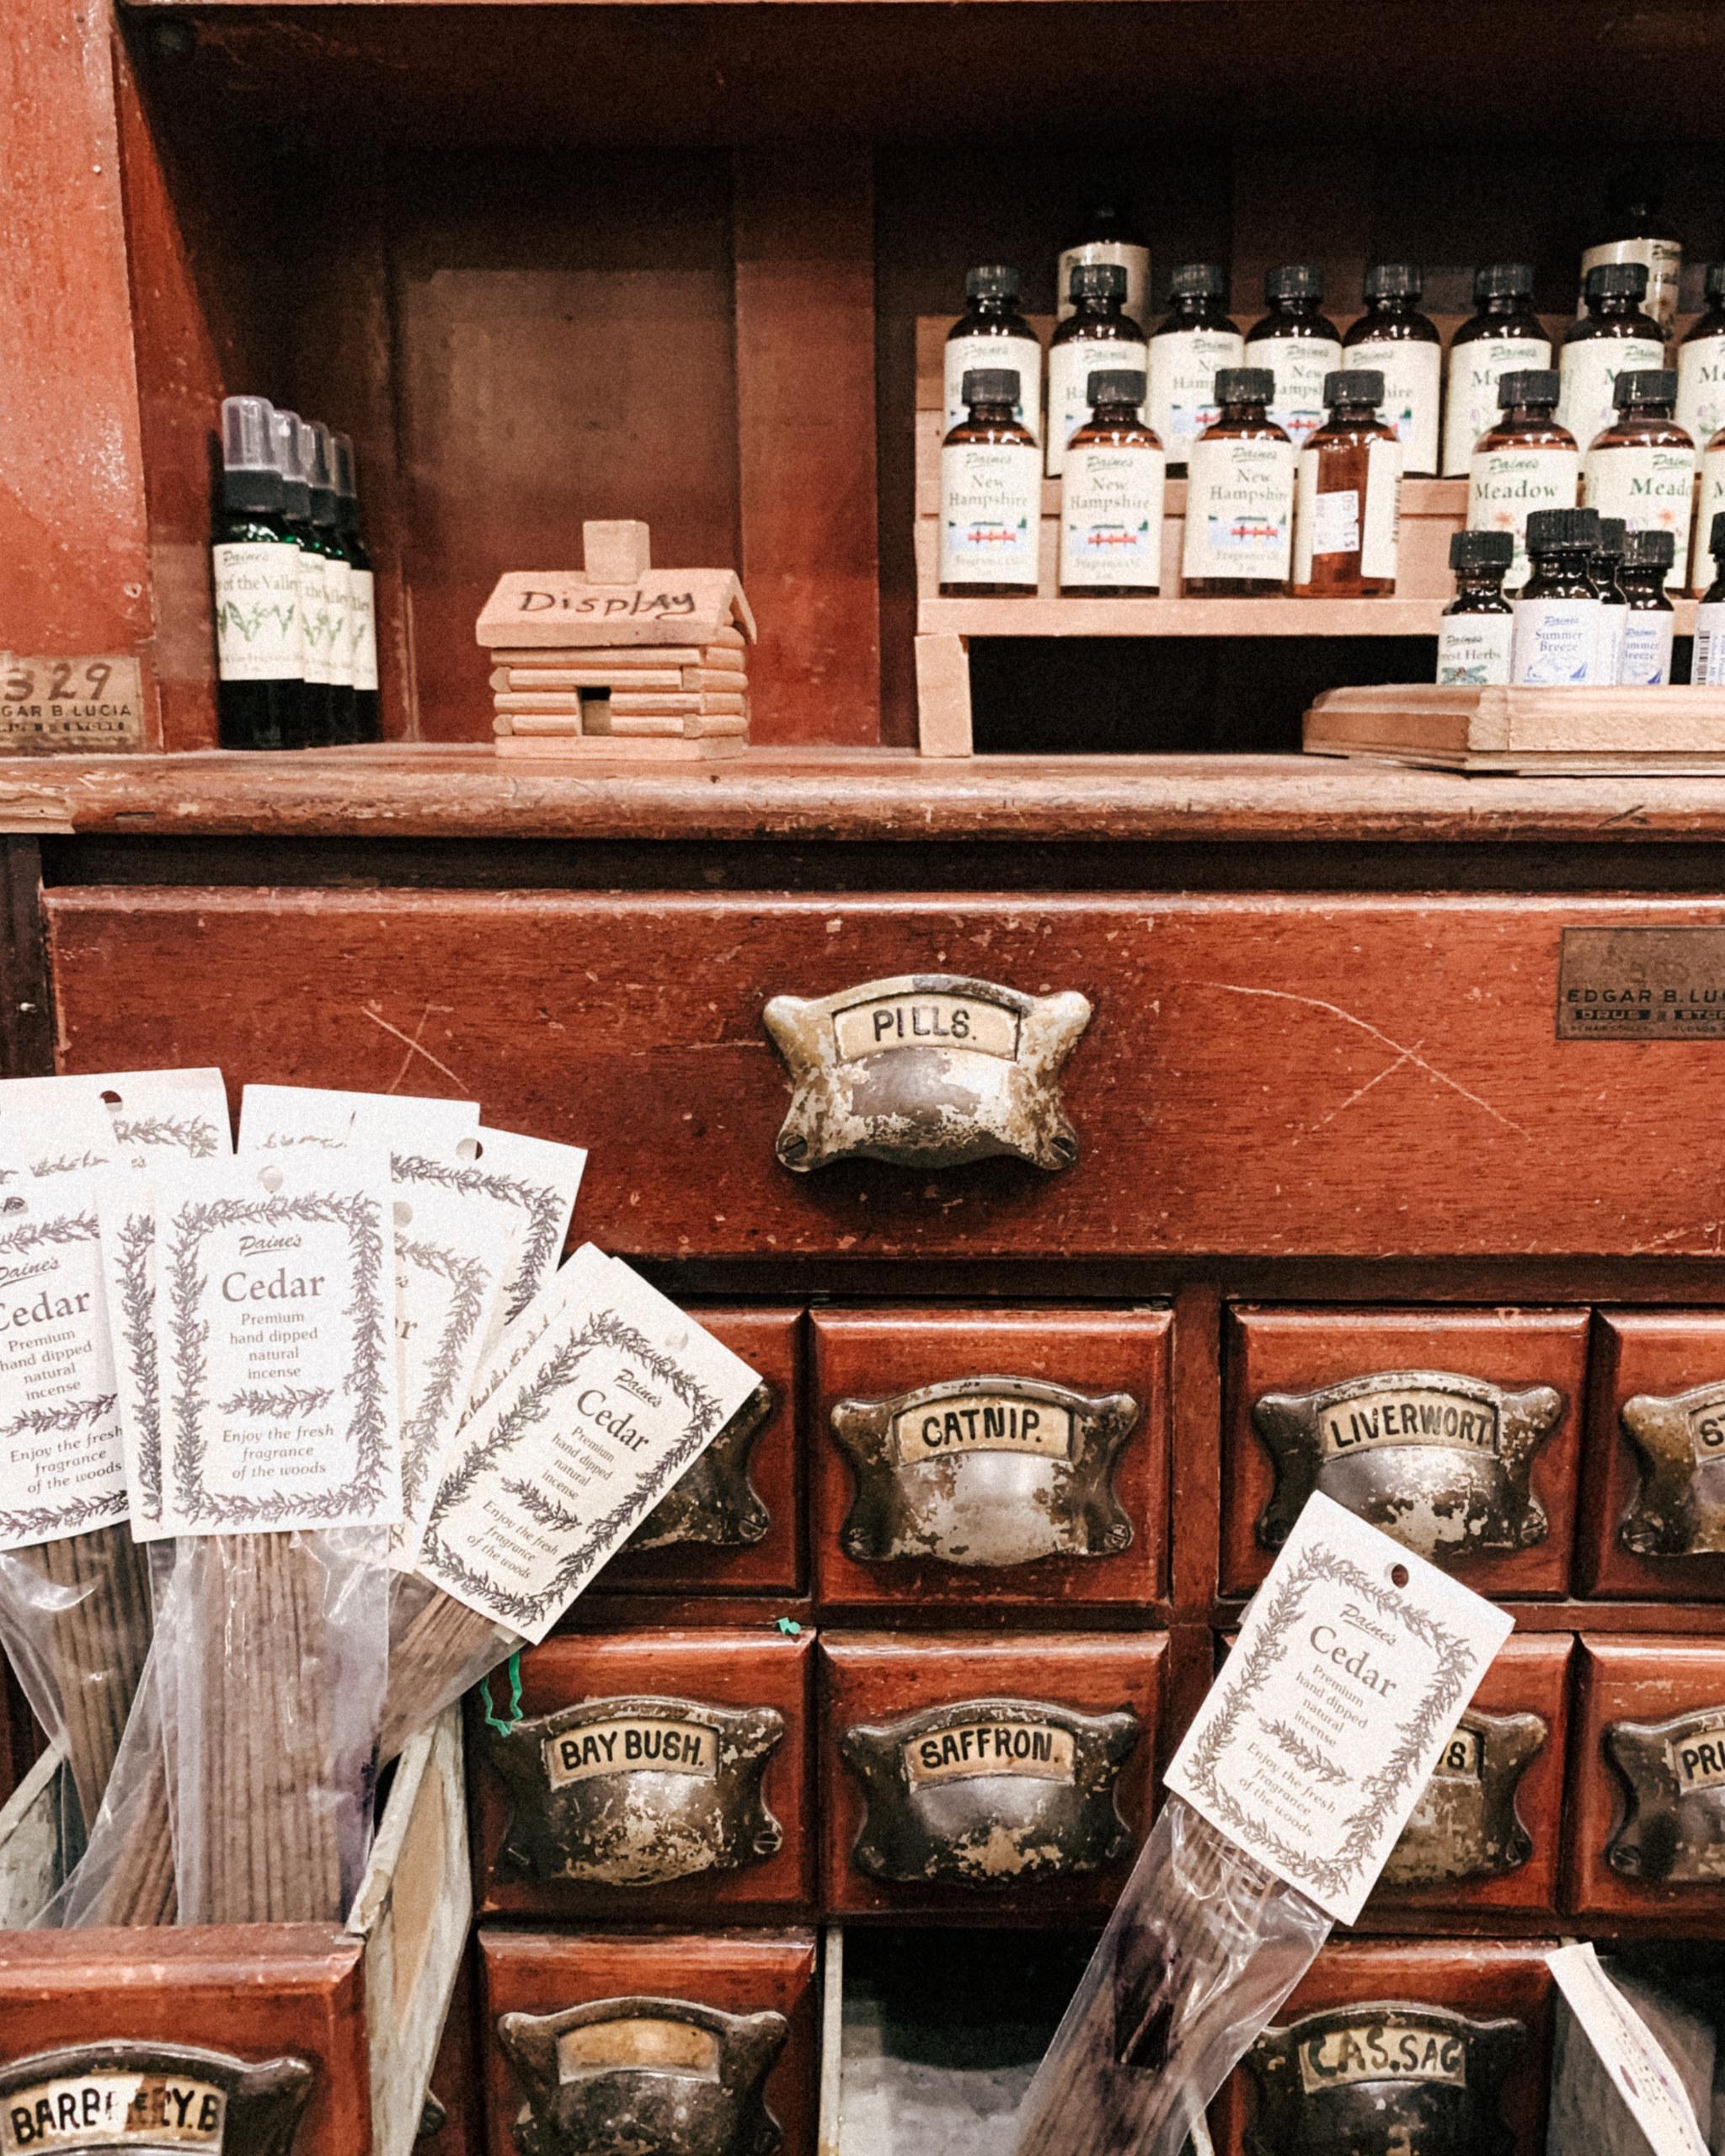 North Conway, New Hampshire Travel Guide - Vintage Pharmacy - Zebs General Store - Simply by Simone - #newengland #travel #newhampshire #roadtrip #westchestercounty #northconway #newhampshiretravel #mountwashington #newenglandtravel 